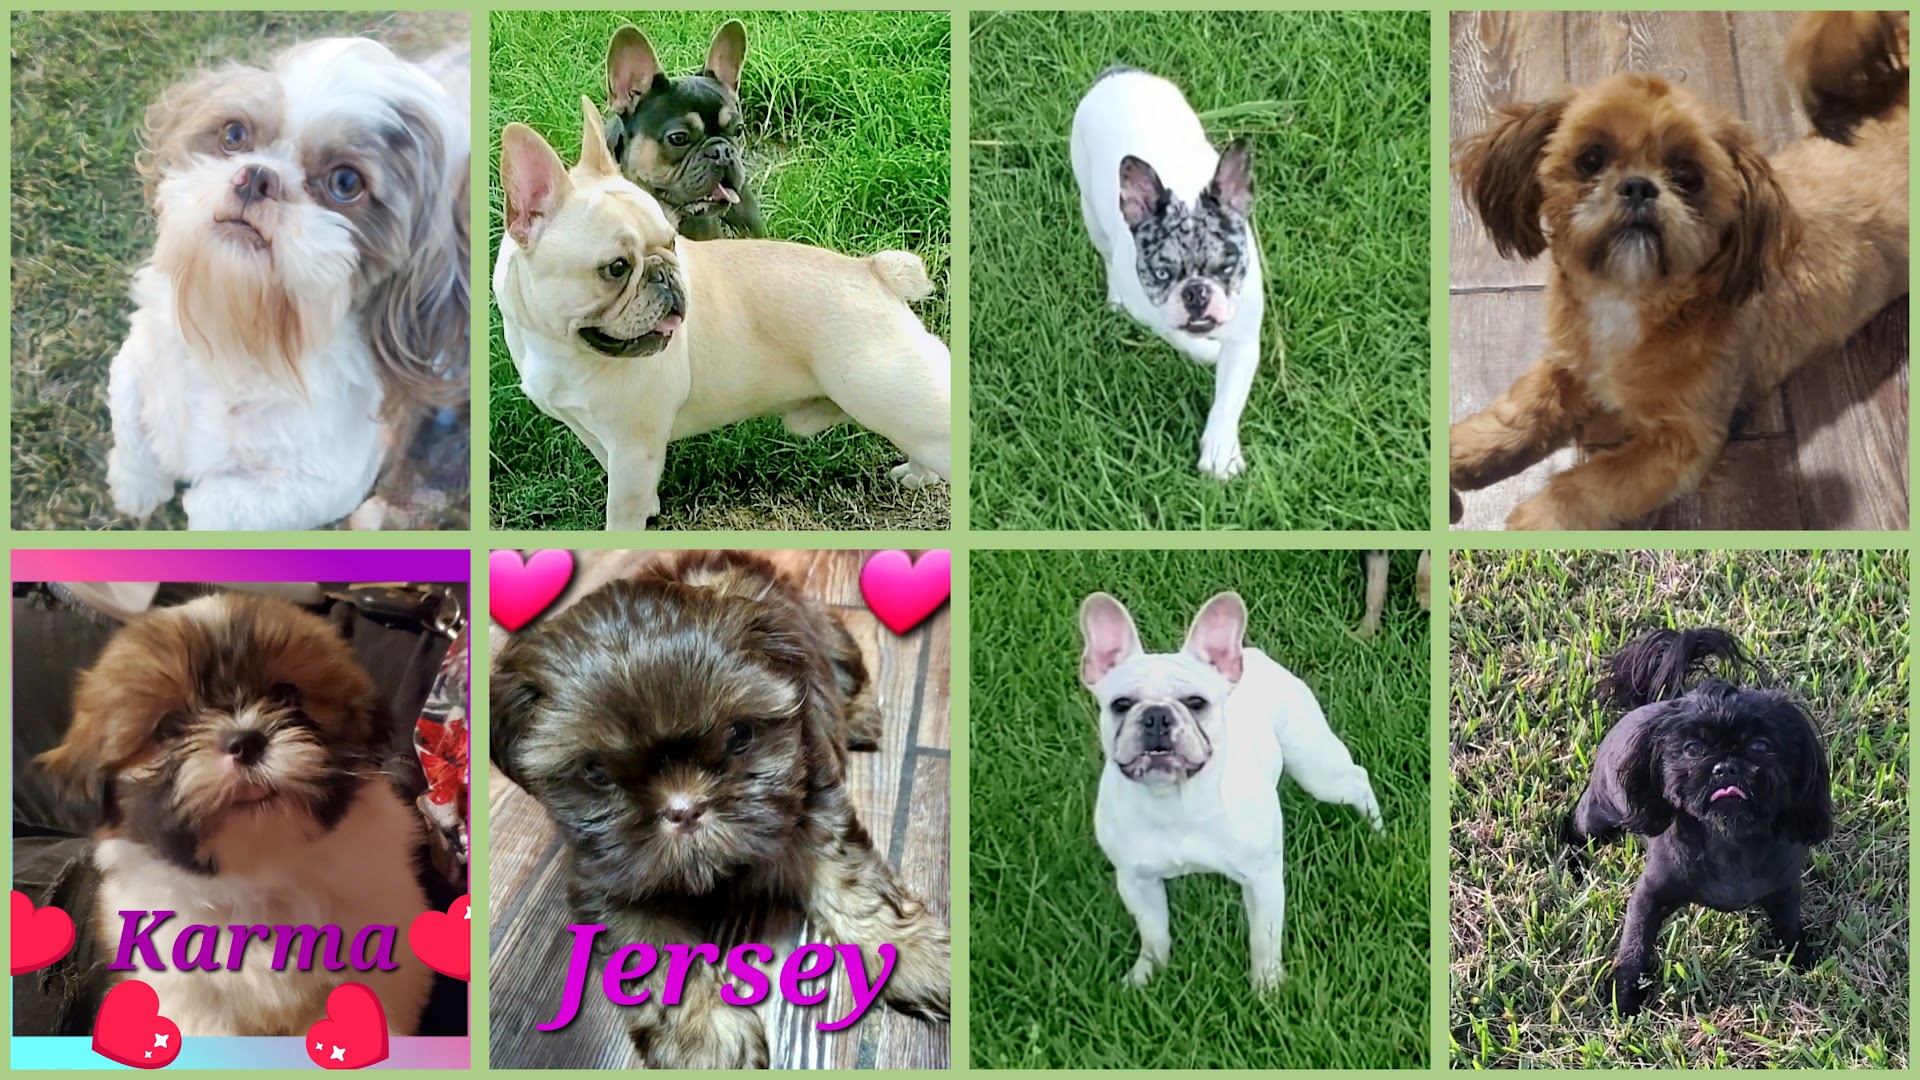 A&B 5 Star Frenchies and Royal Shih Tzus